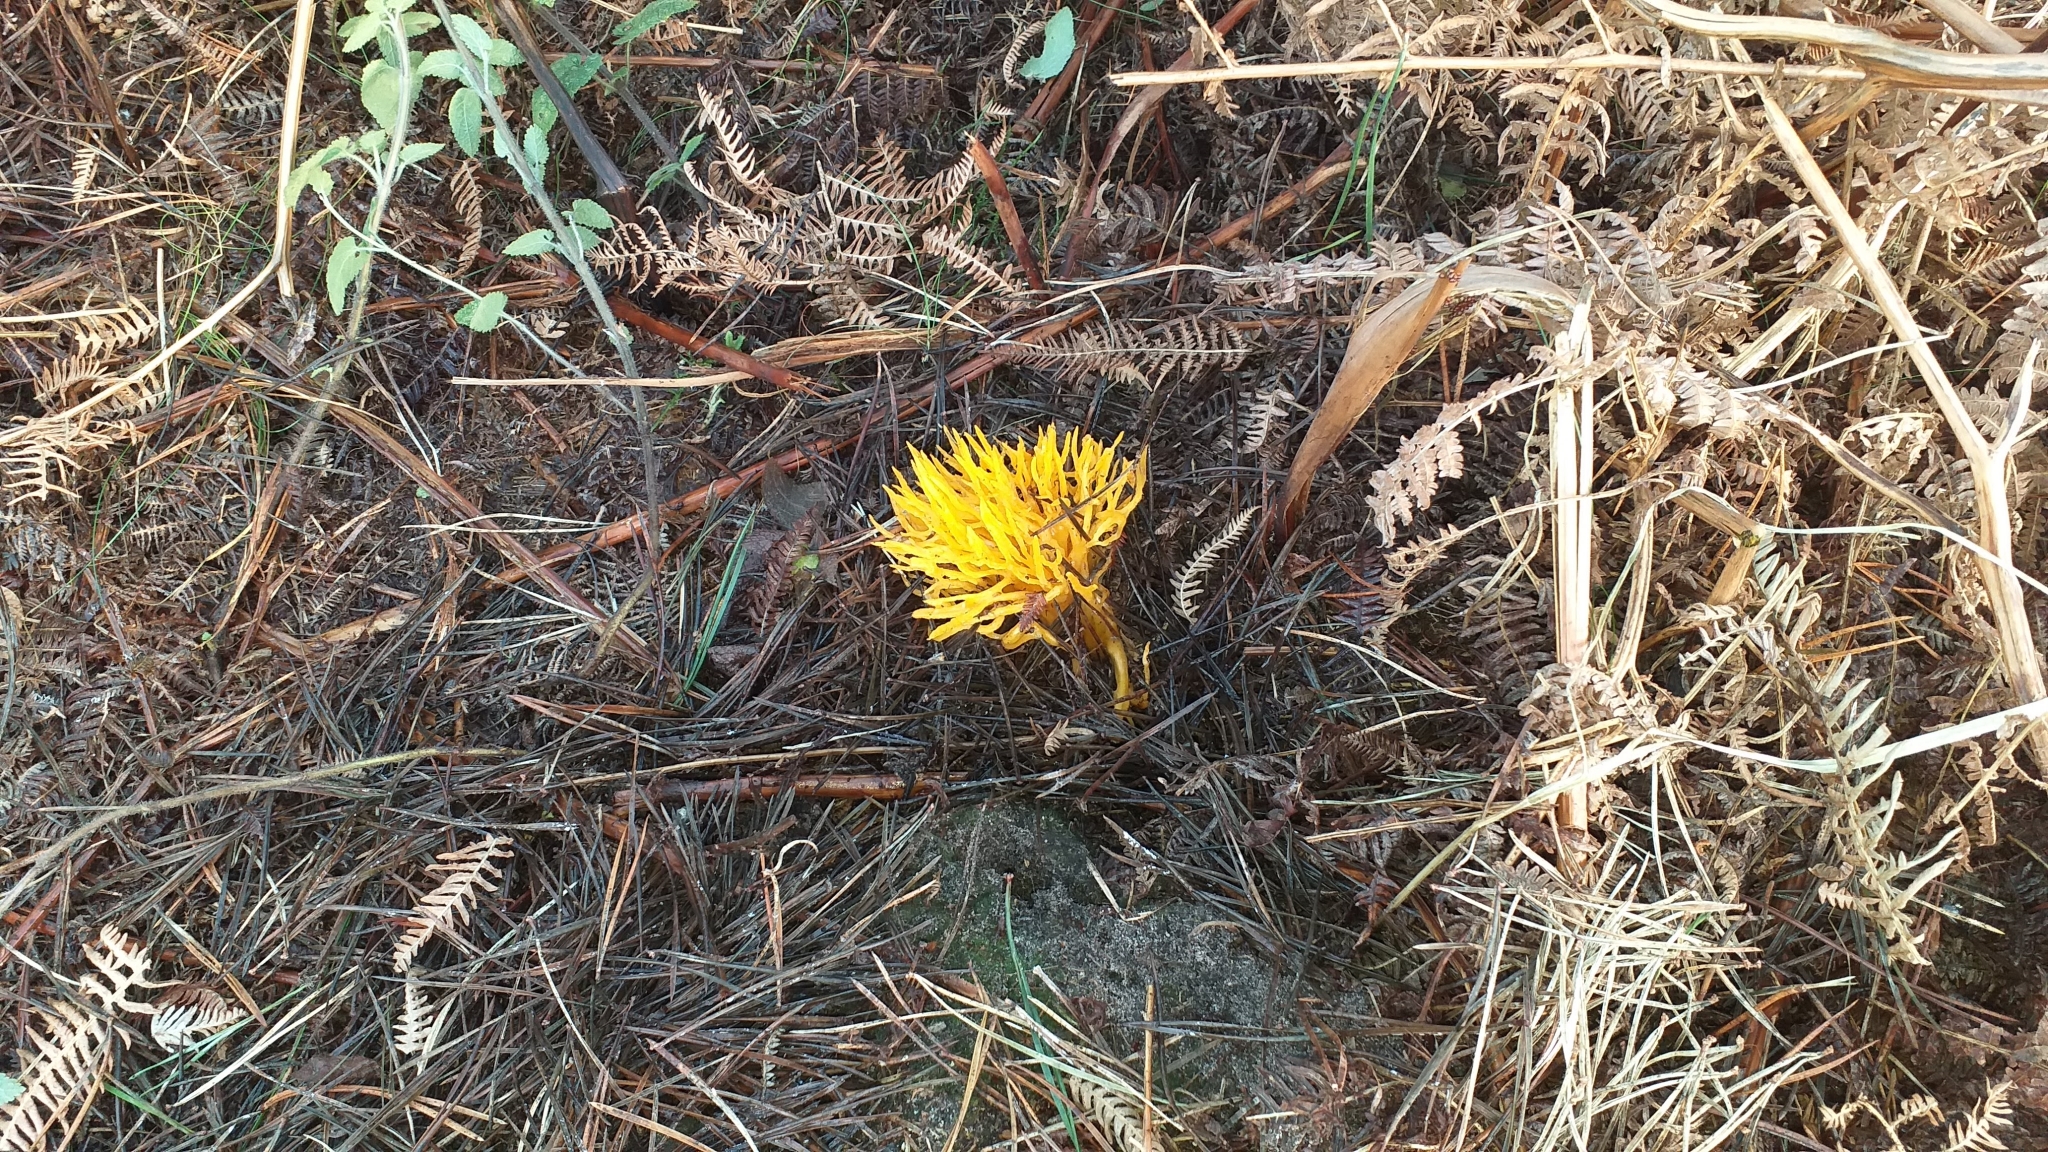 A photo from the FoTF Conservation Event - December 2019 - Self Seeded Pine Tree Removal on the Goshawk Trail : A flower on the Goshawk Trail